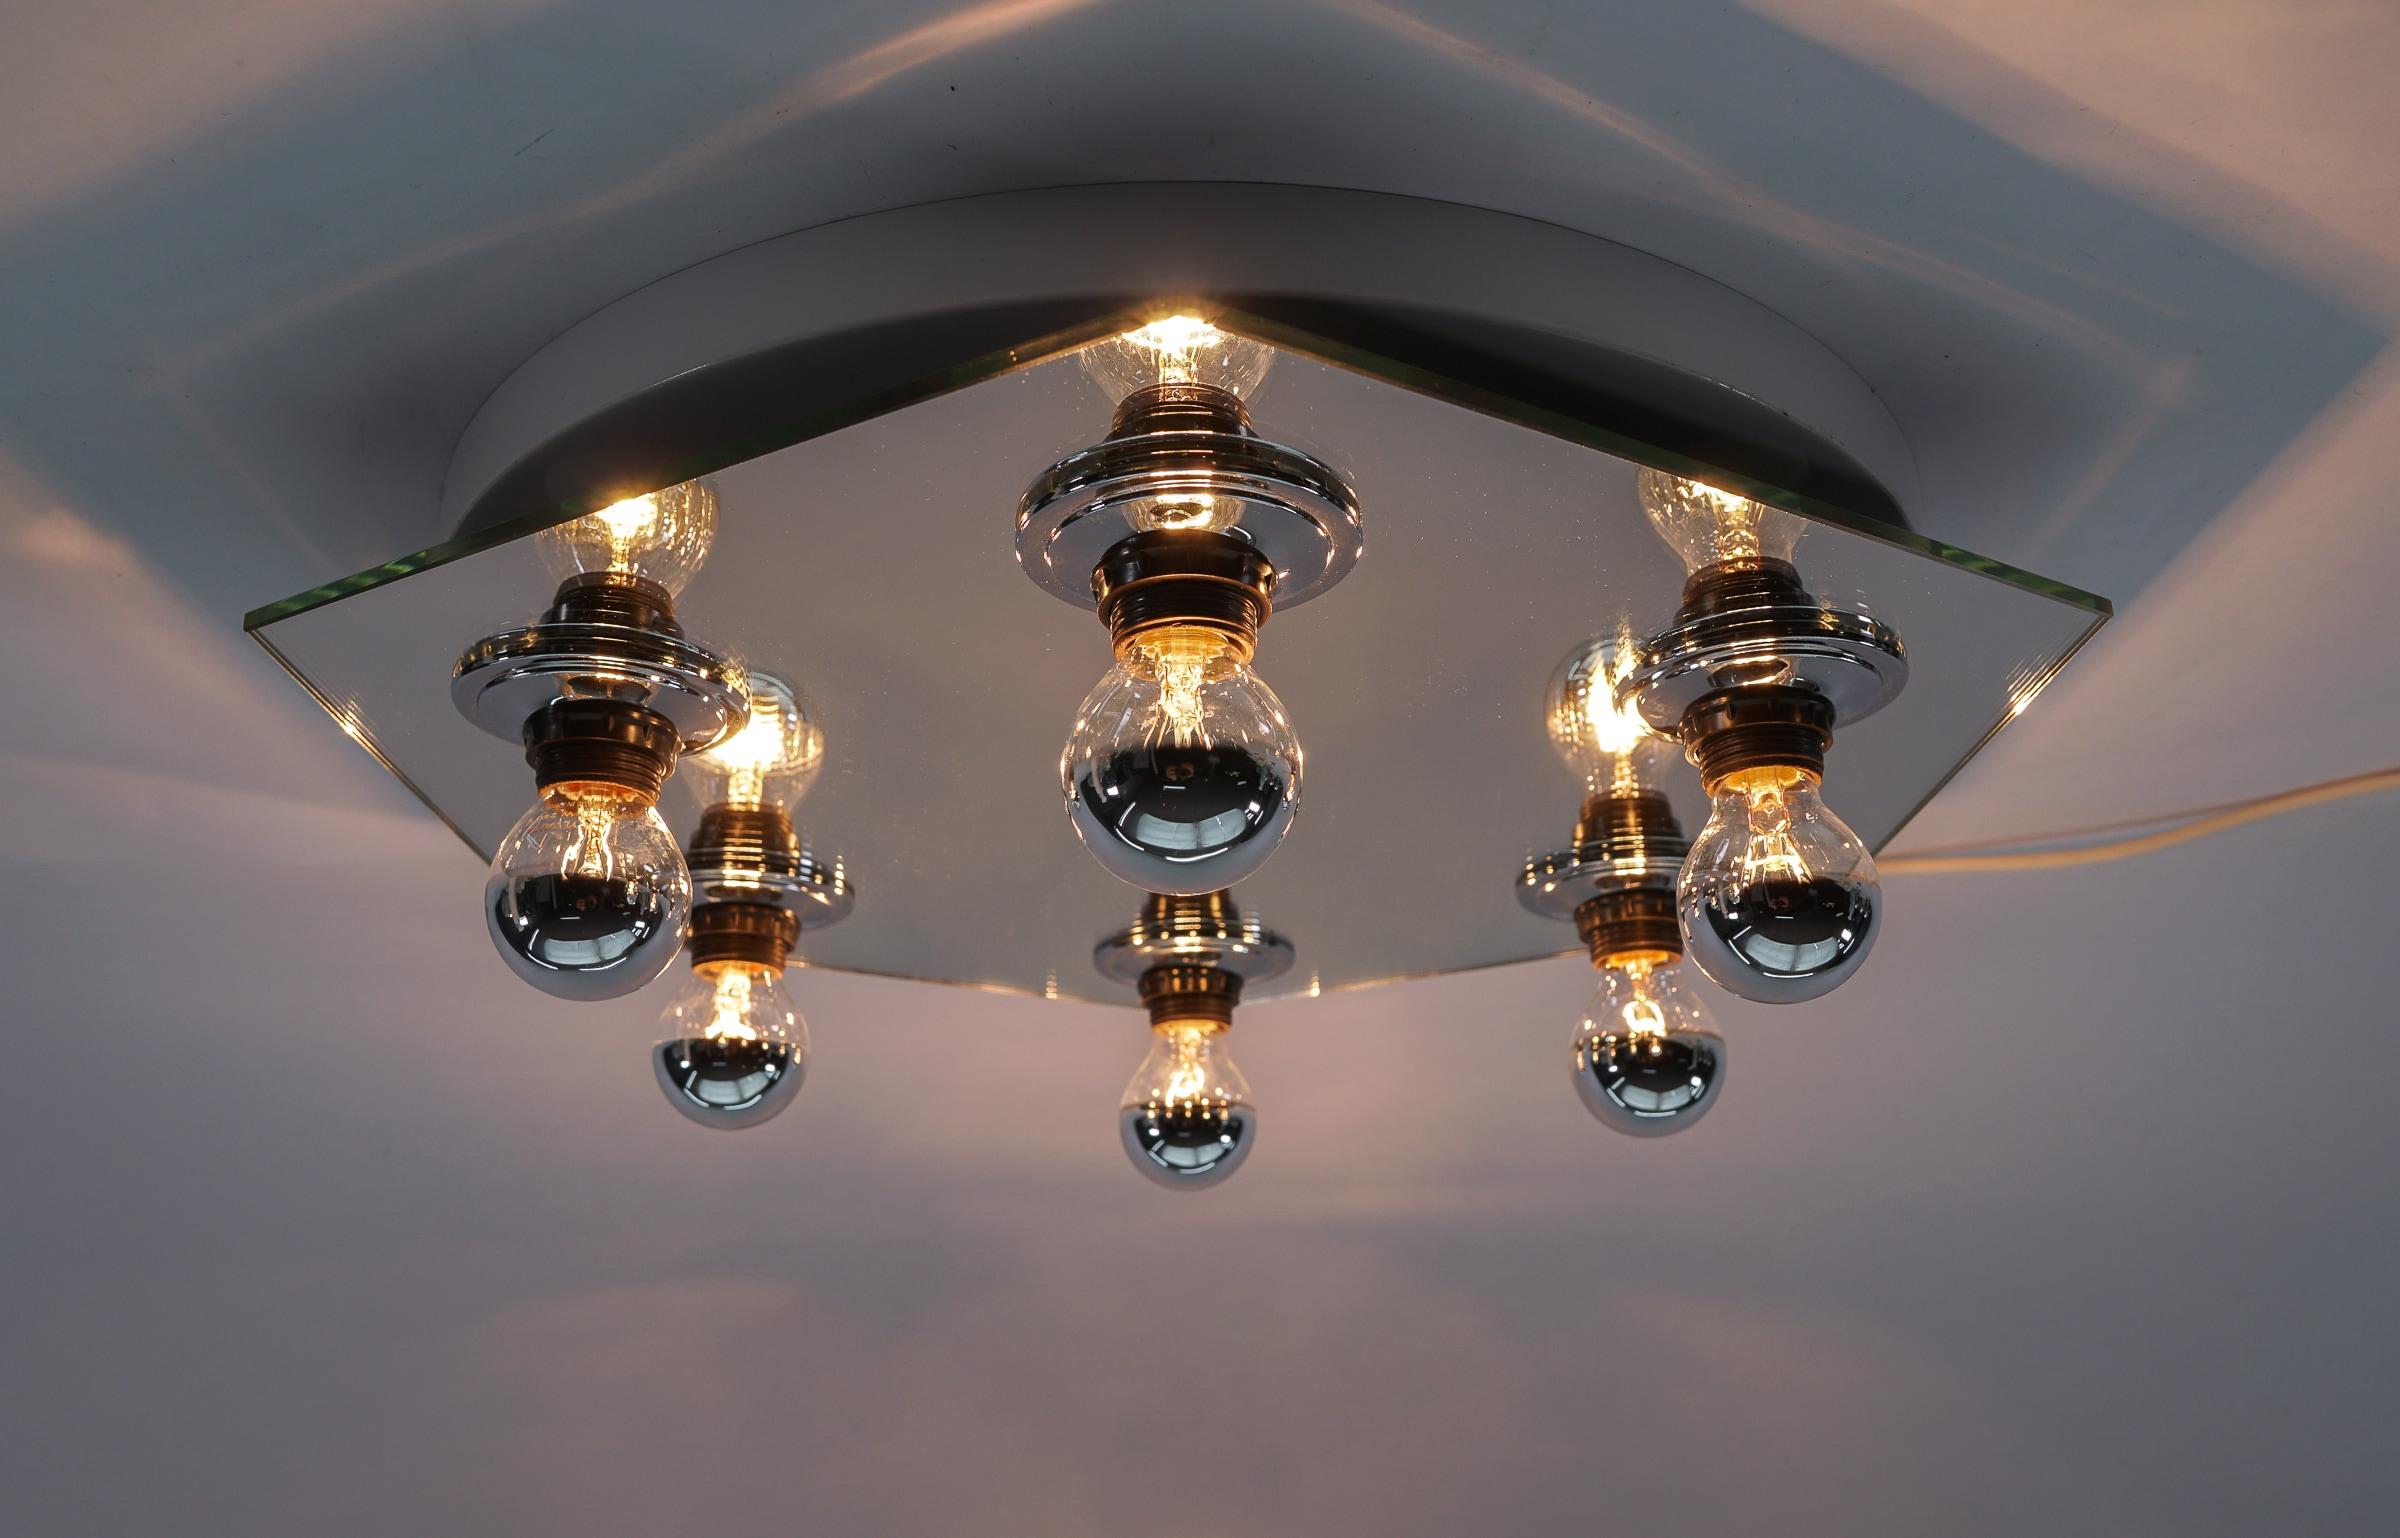 Metal Hexagonal Mirrored Ceiling Lamp With Six Light Bulbs, 1970s Italy For Sale